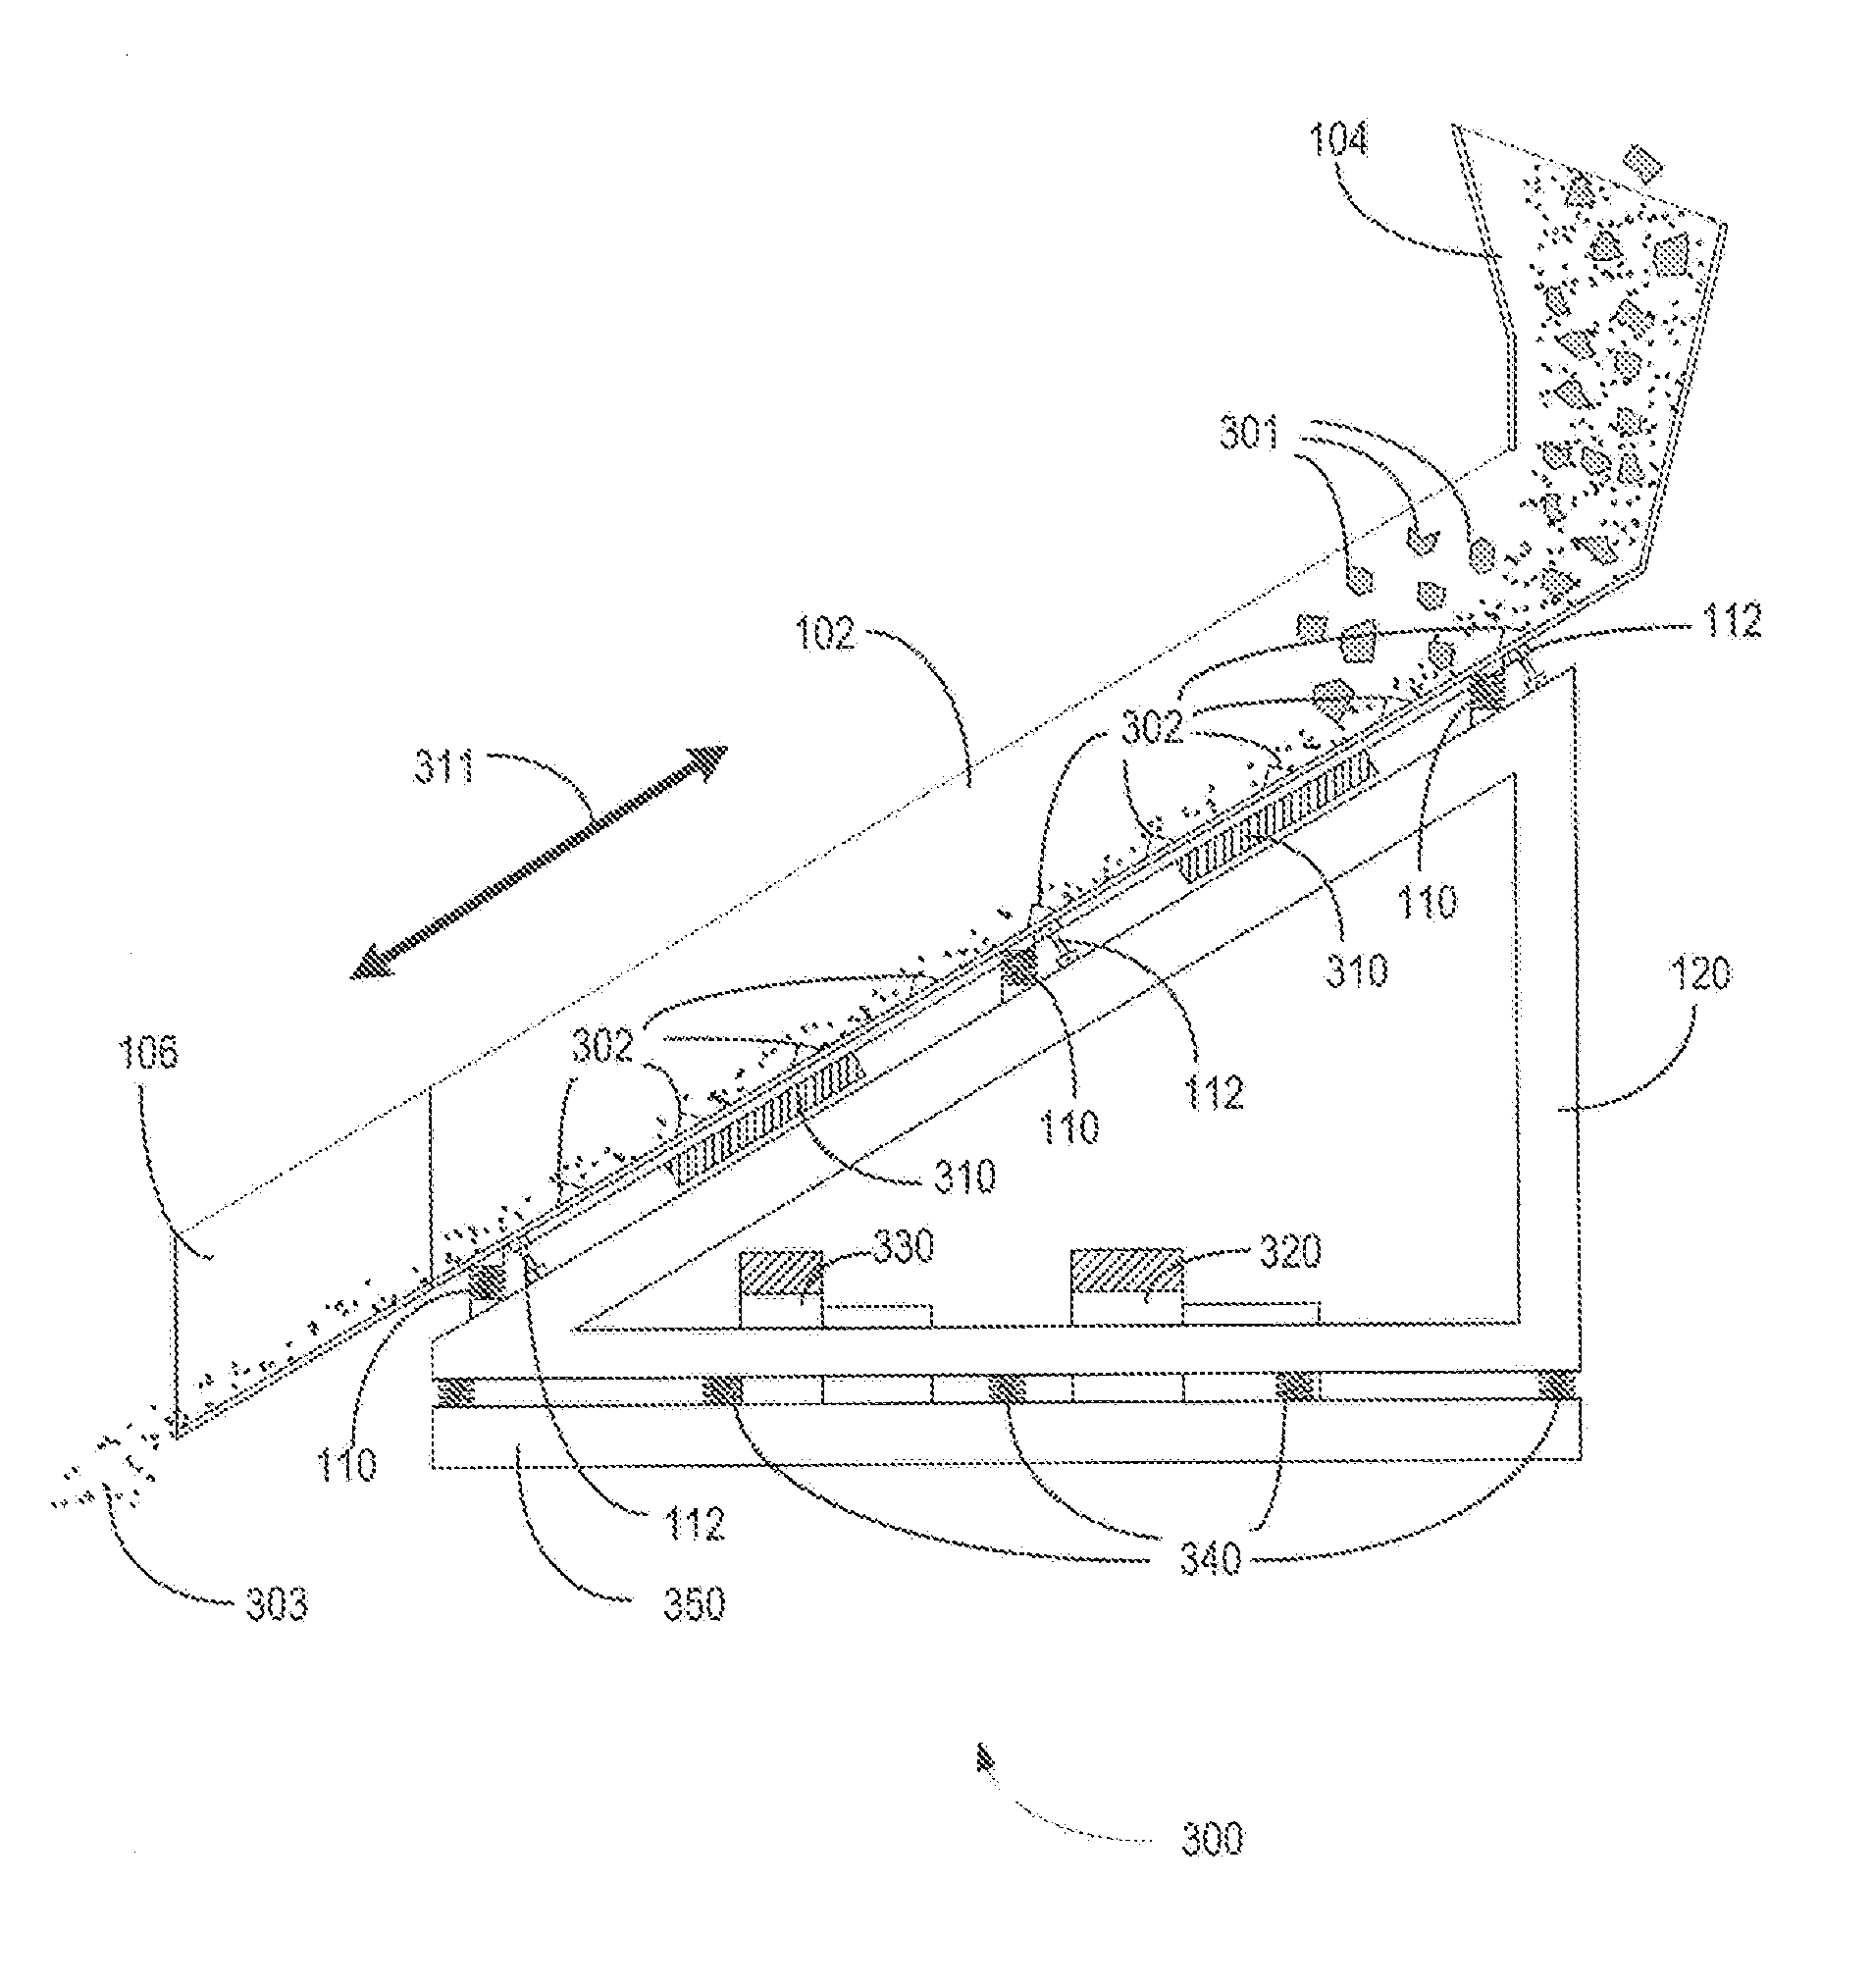 Method and apparatus for separating plastics from compost and other recyclable materials